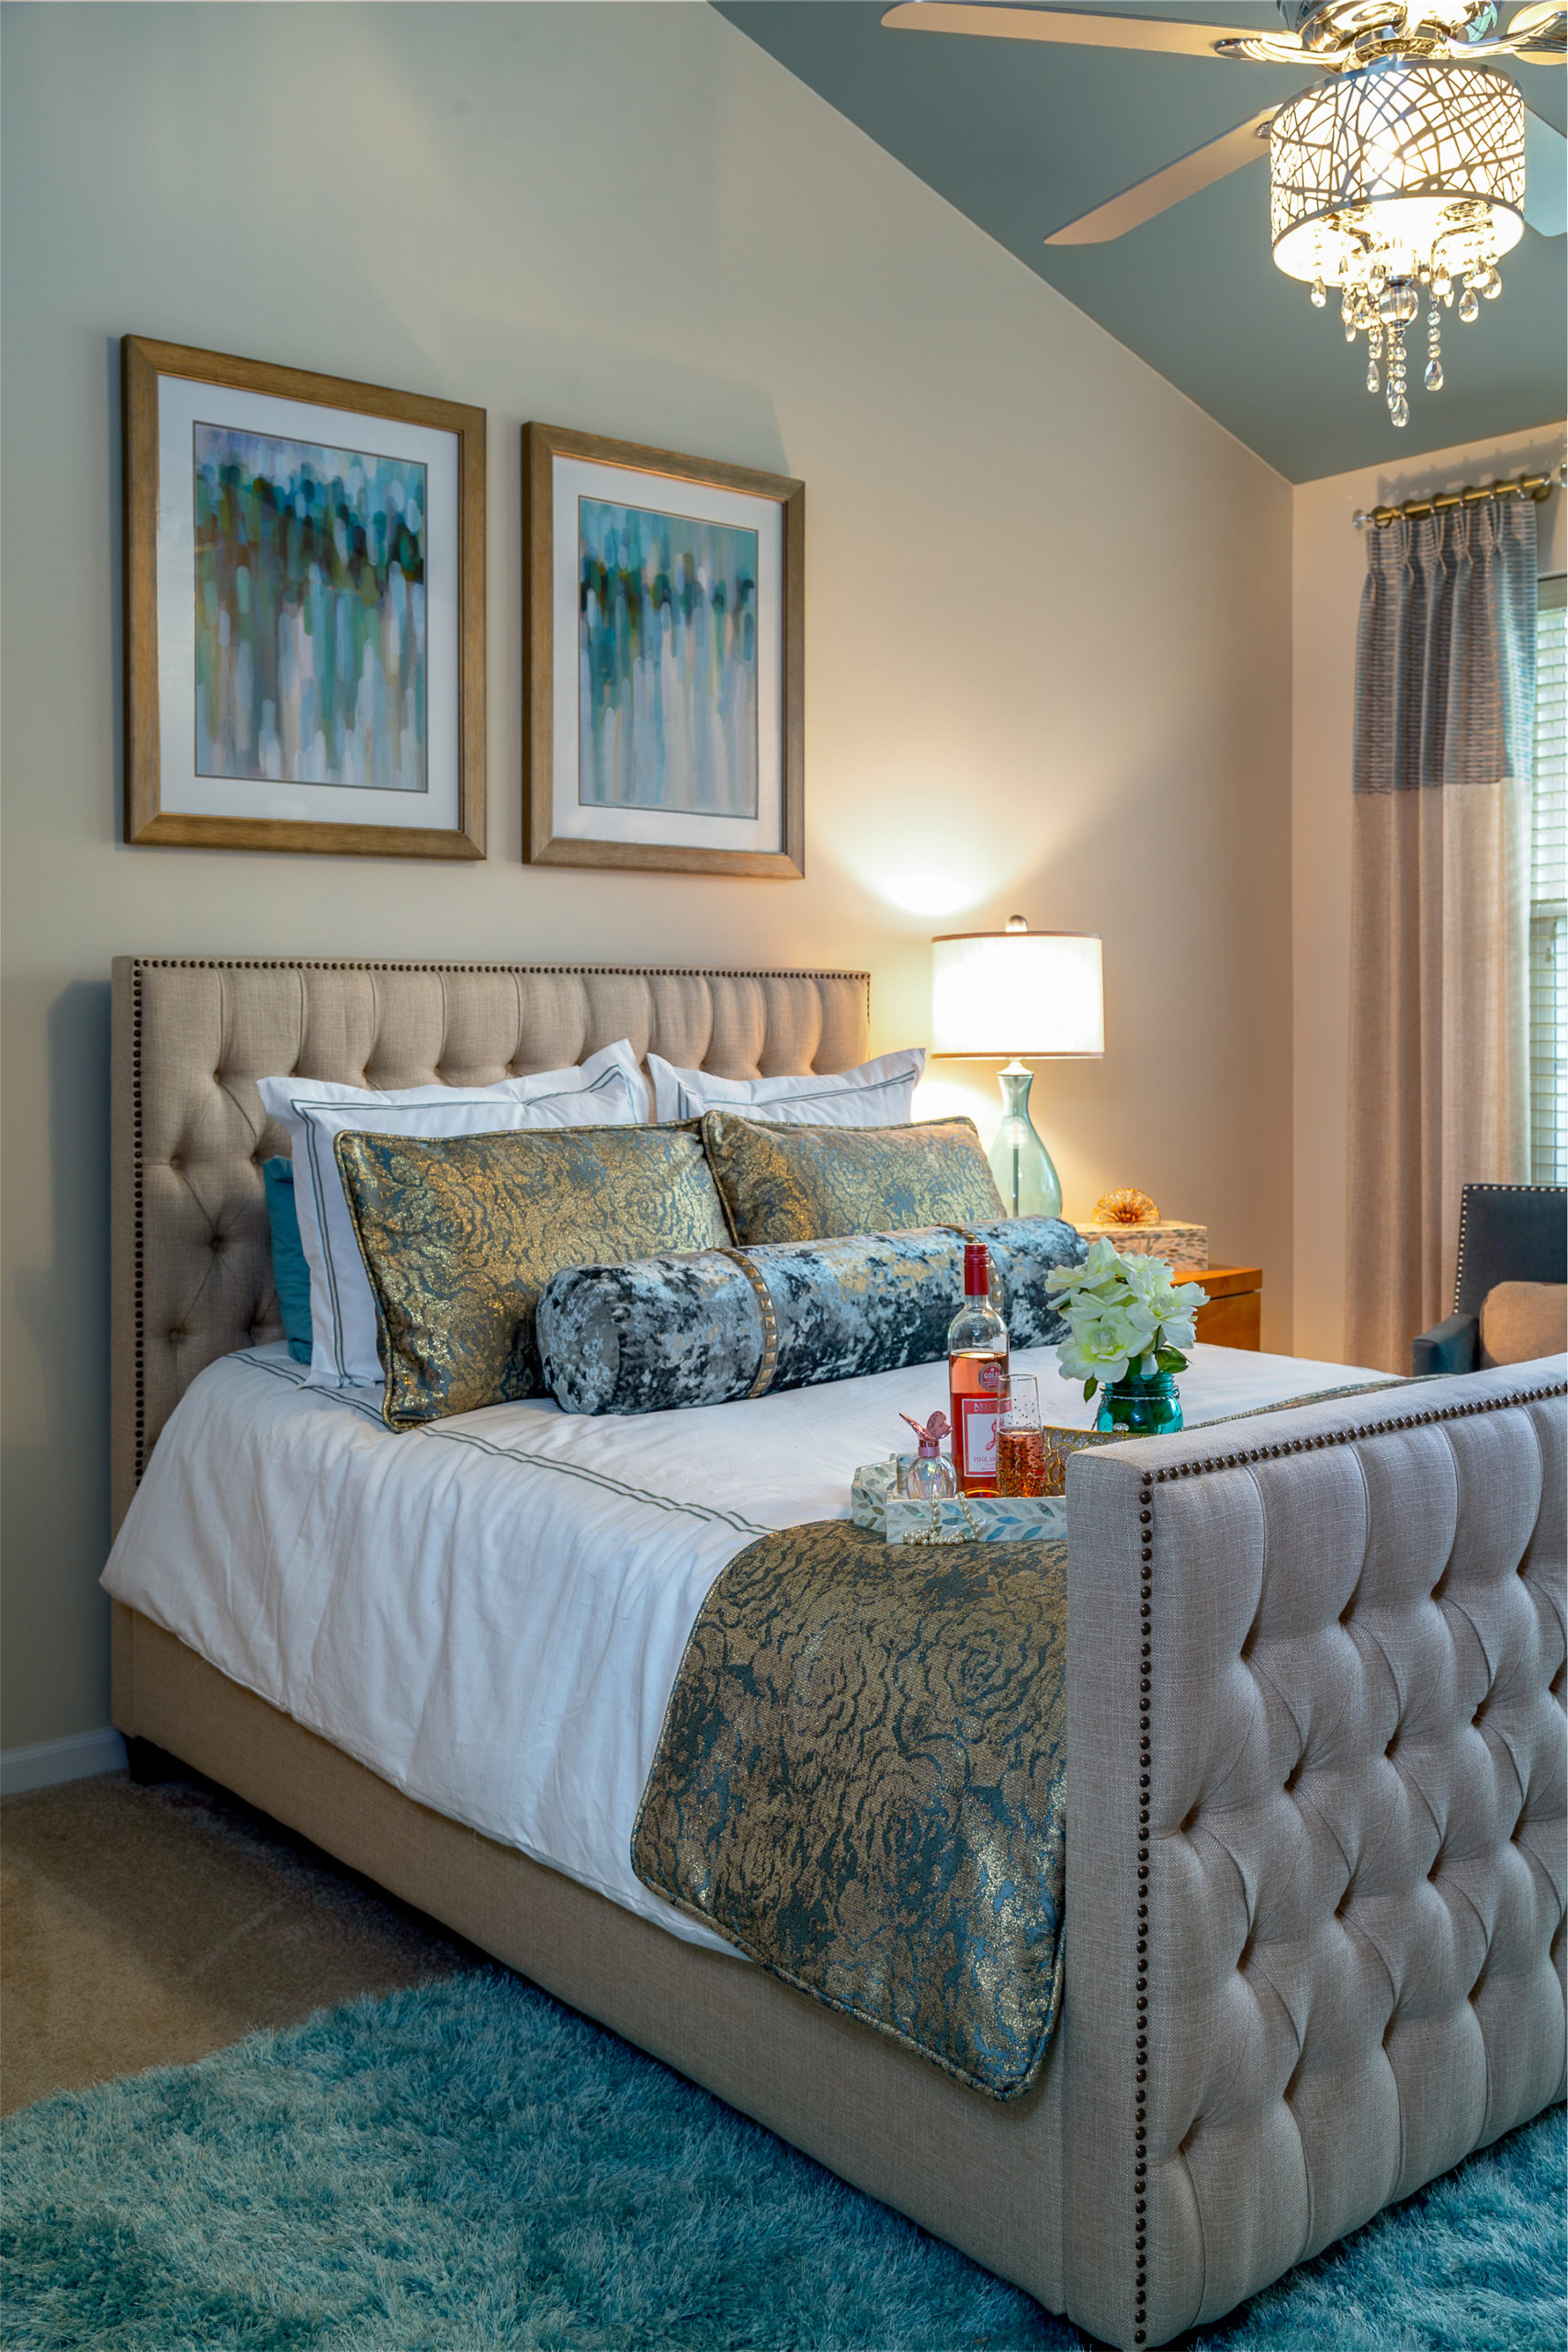 Upgrading the Guest Room: 5 Things You Need to Know